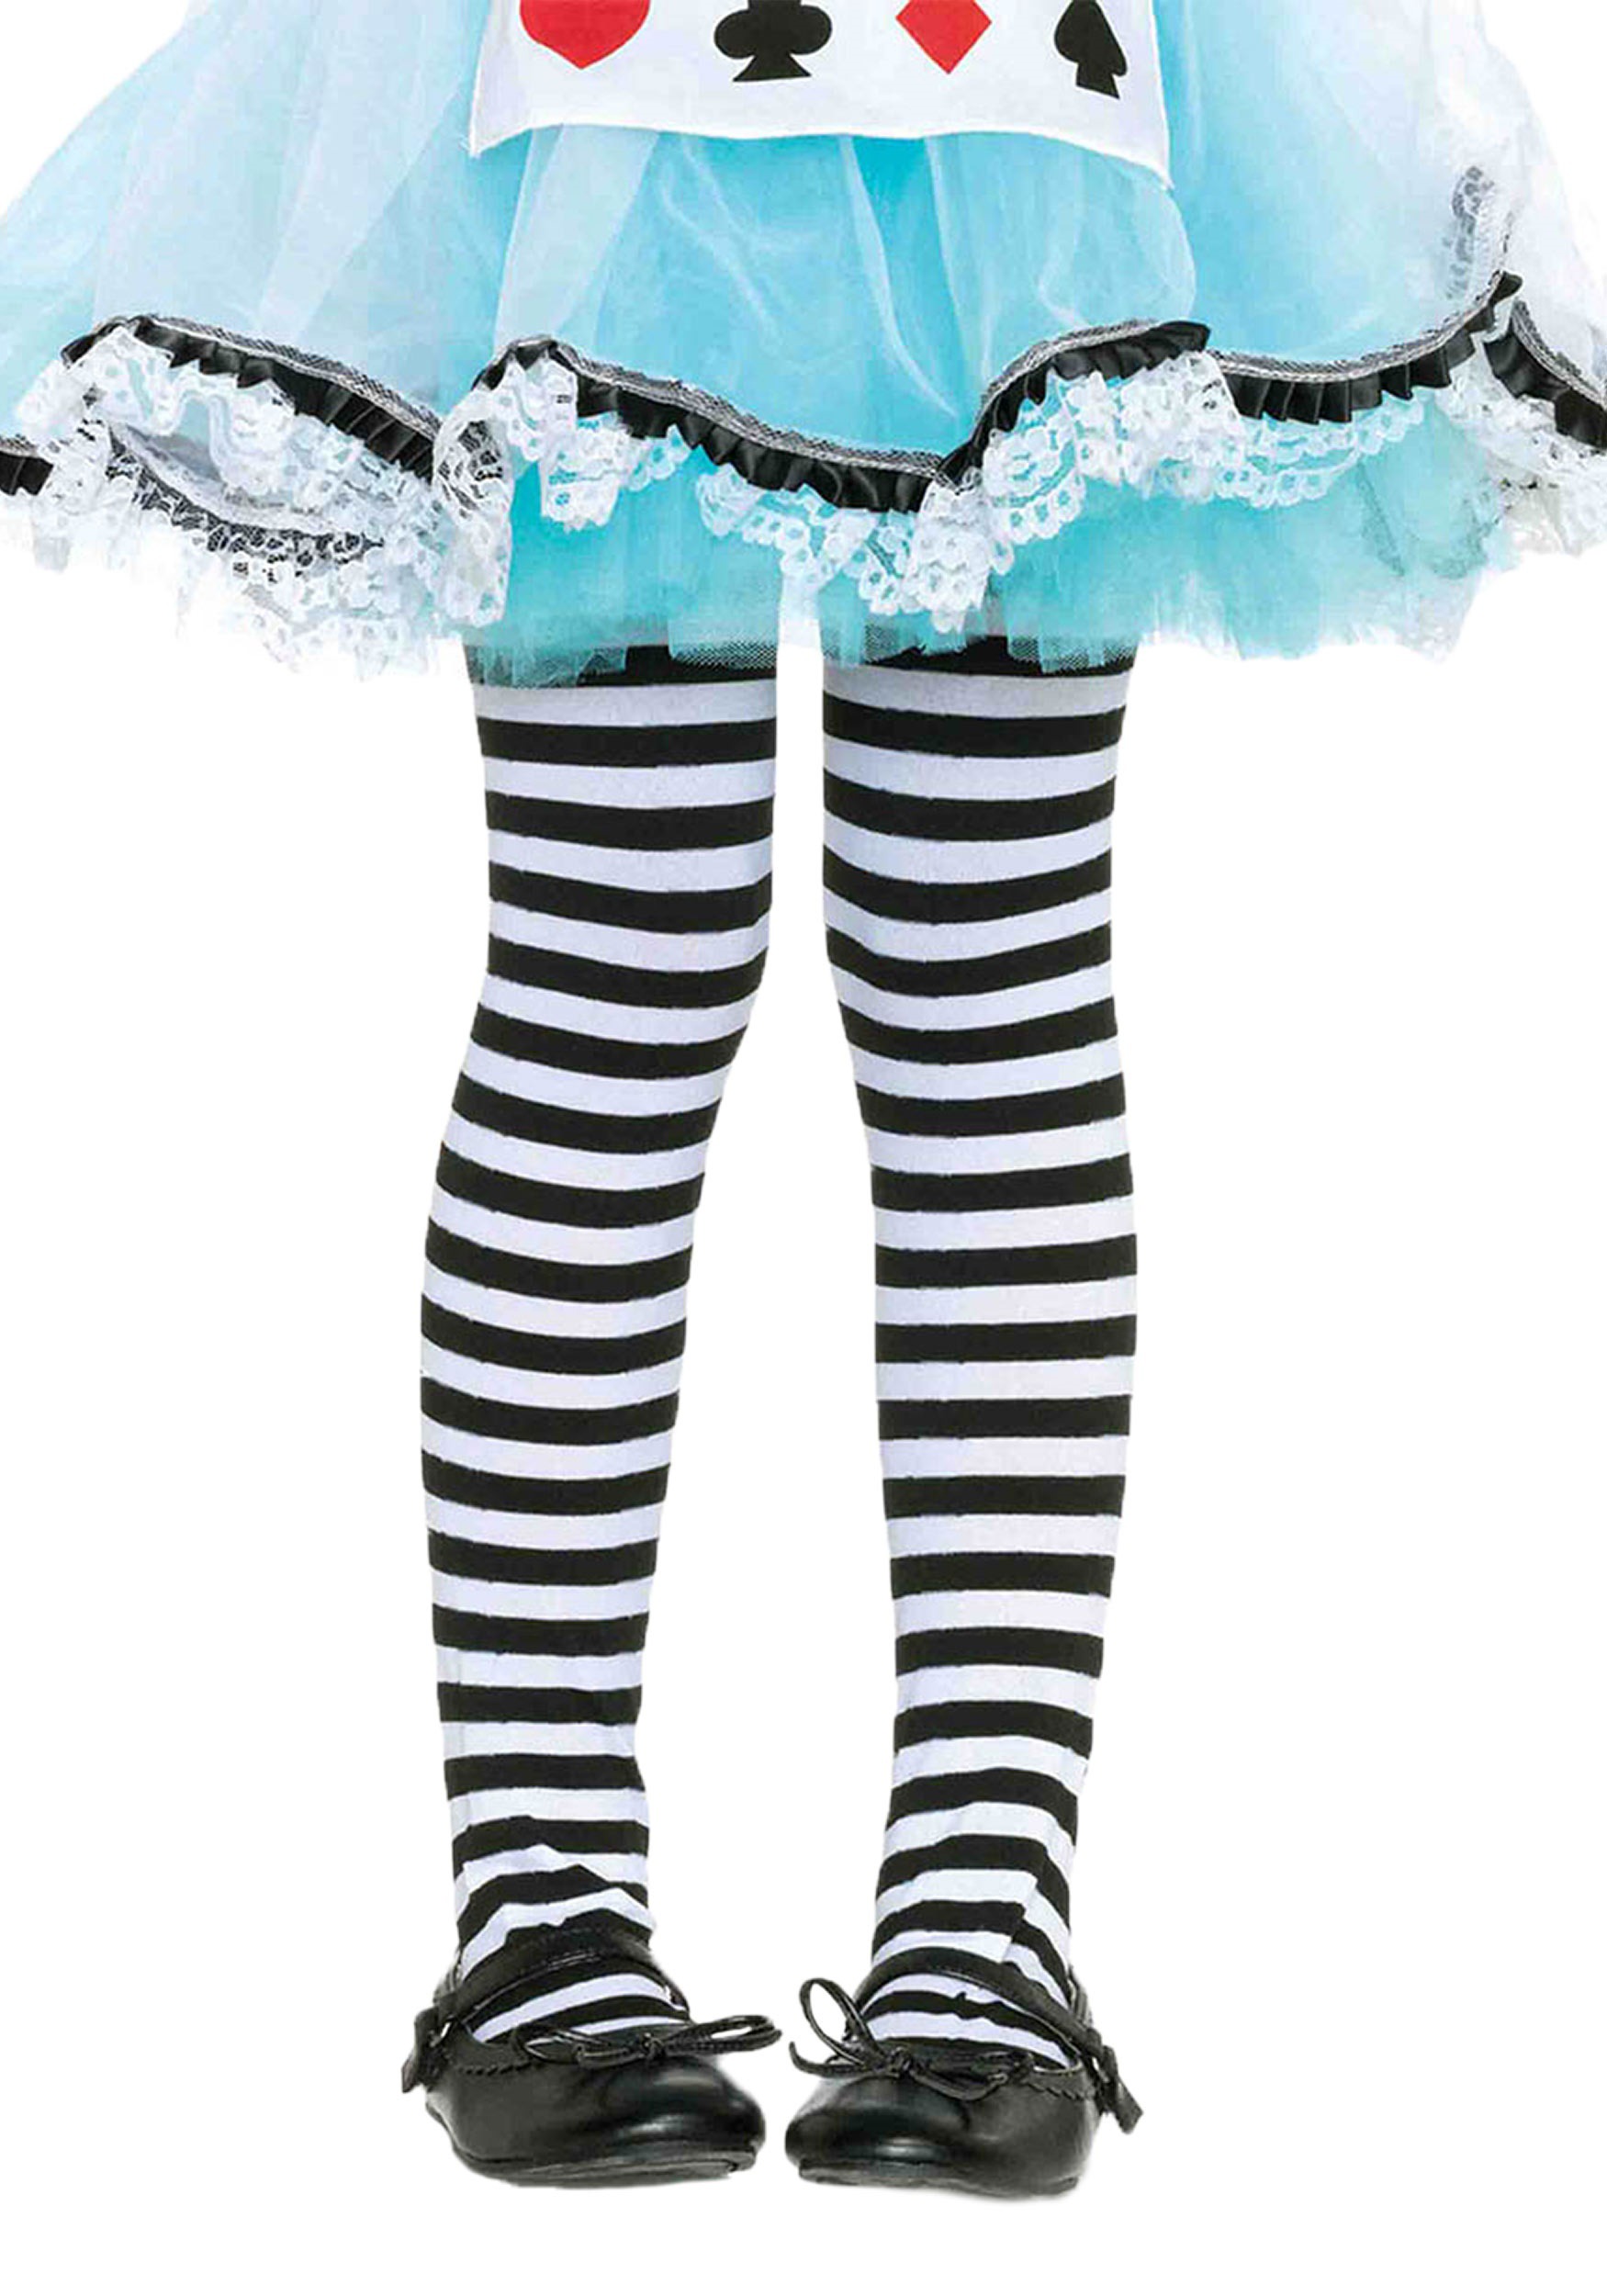 https://images.halloweencostumes.ca/products/6564/1-1/kids-black-and-white-striped-tights.jpg